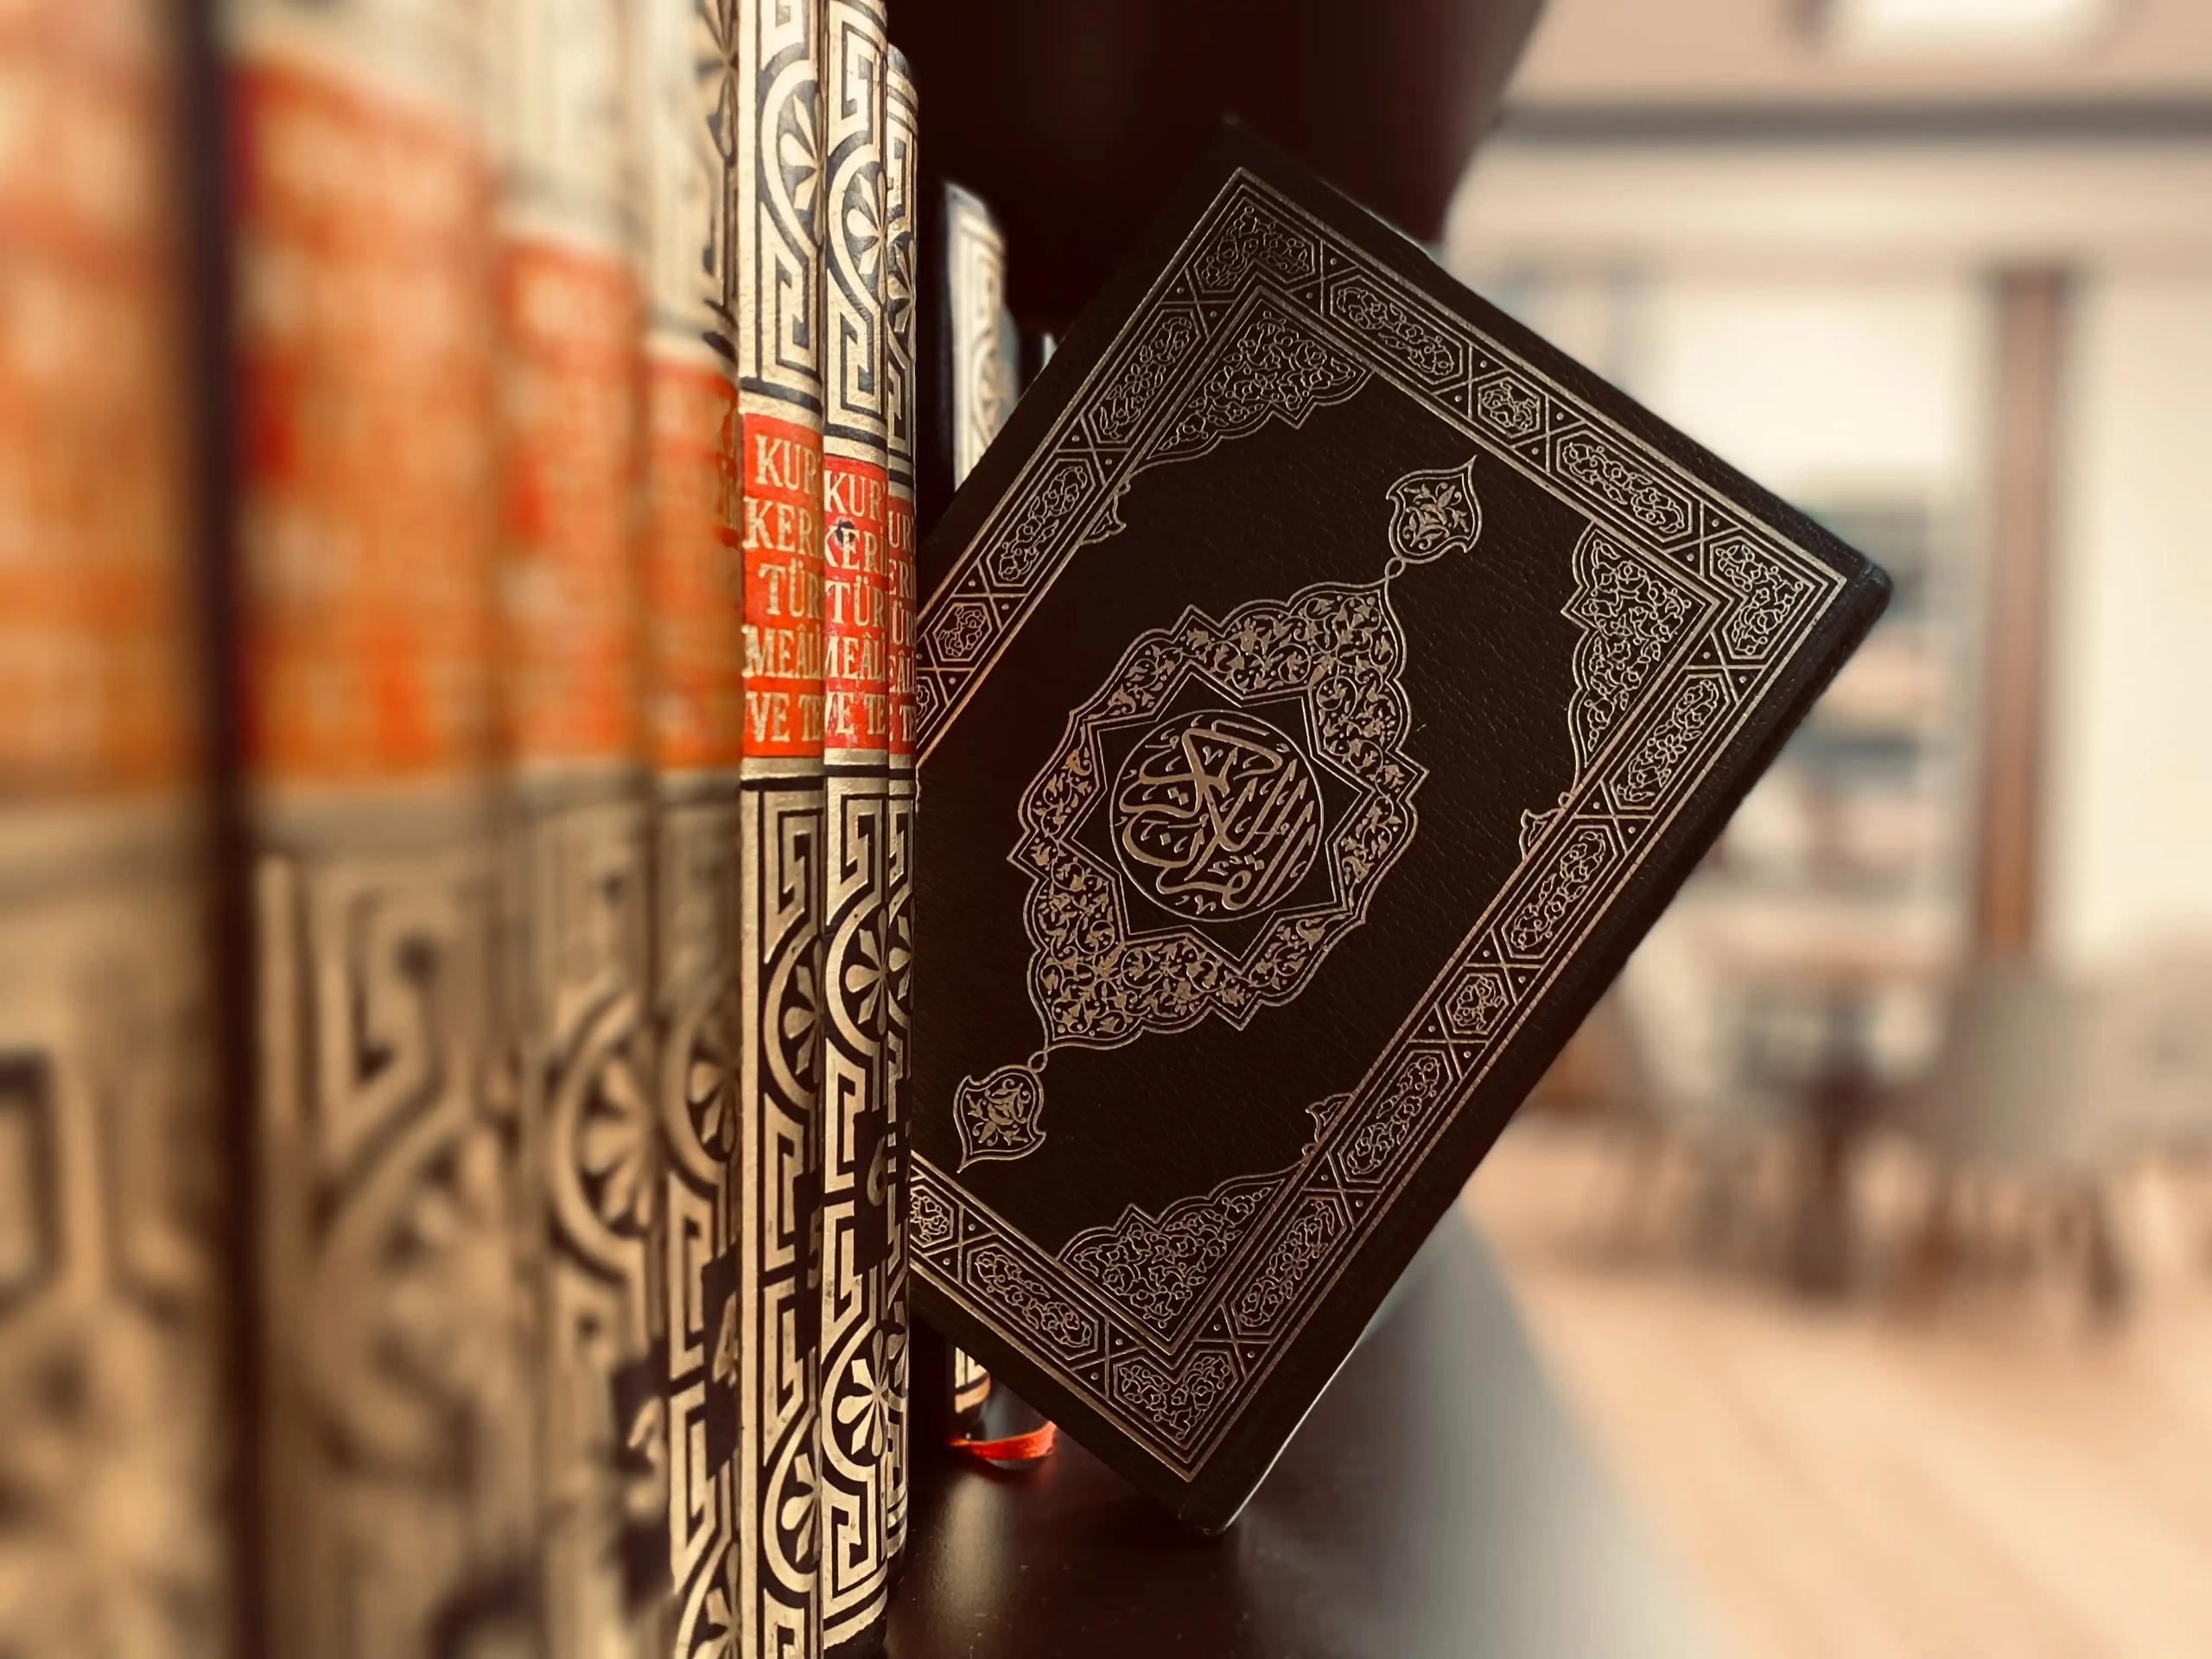 What do you think is the best age to memorize Quran?